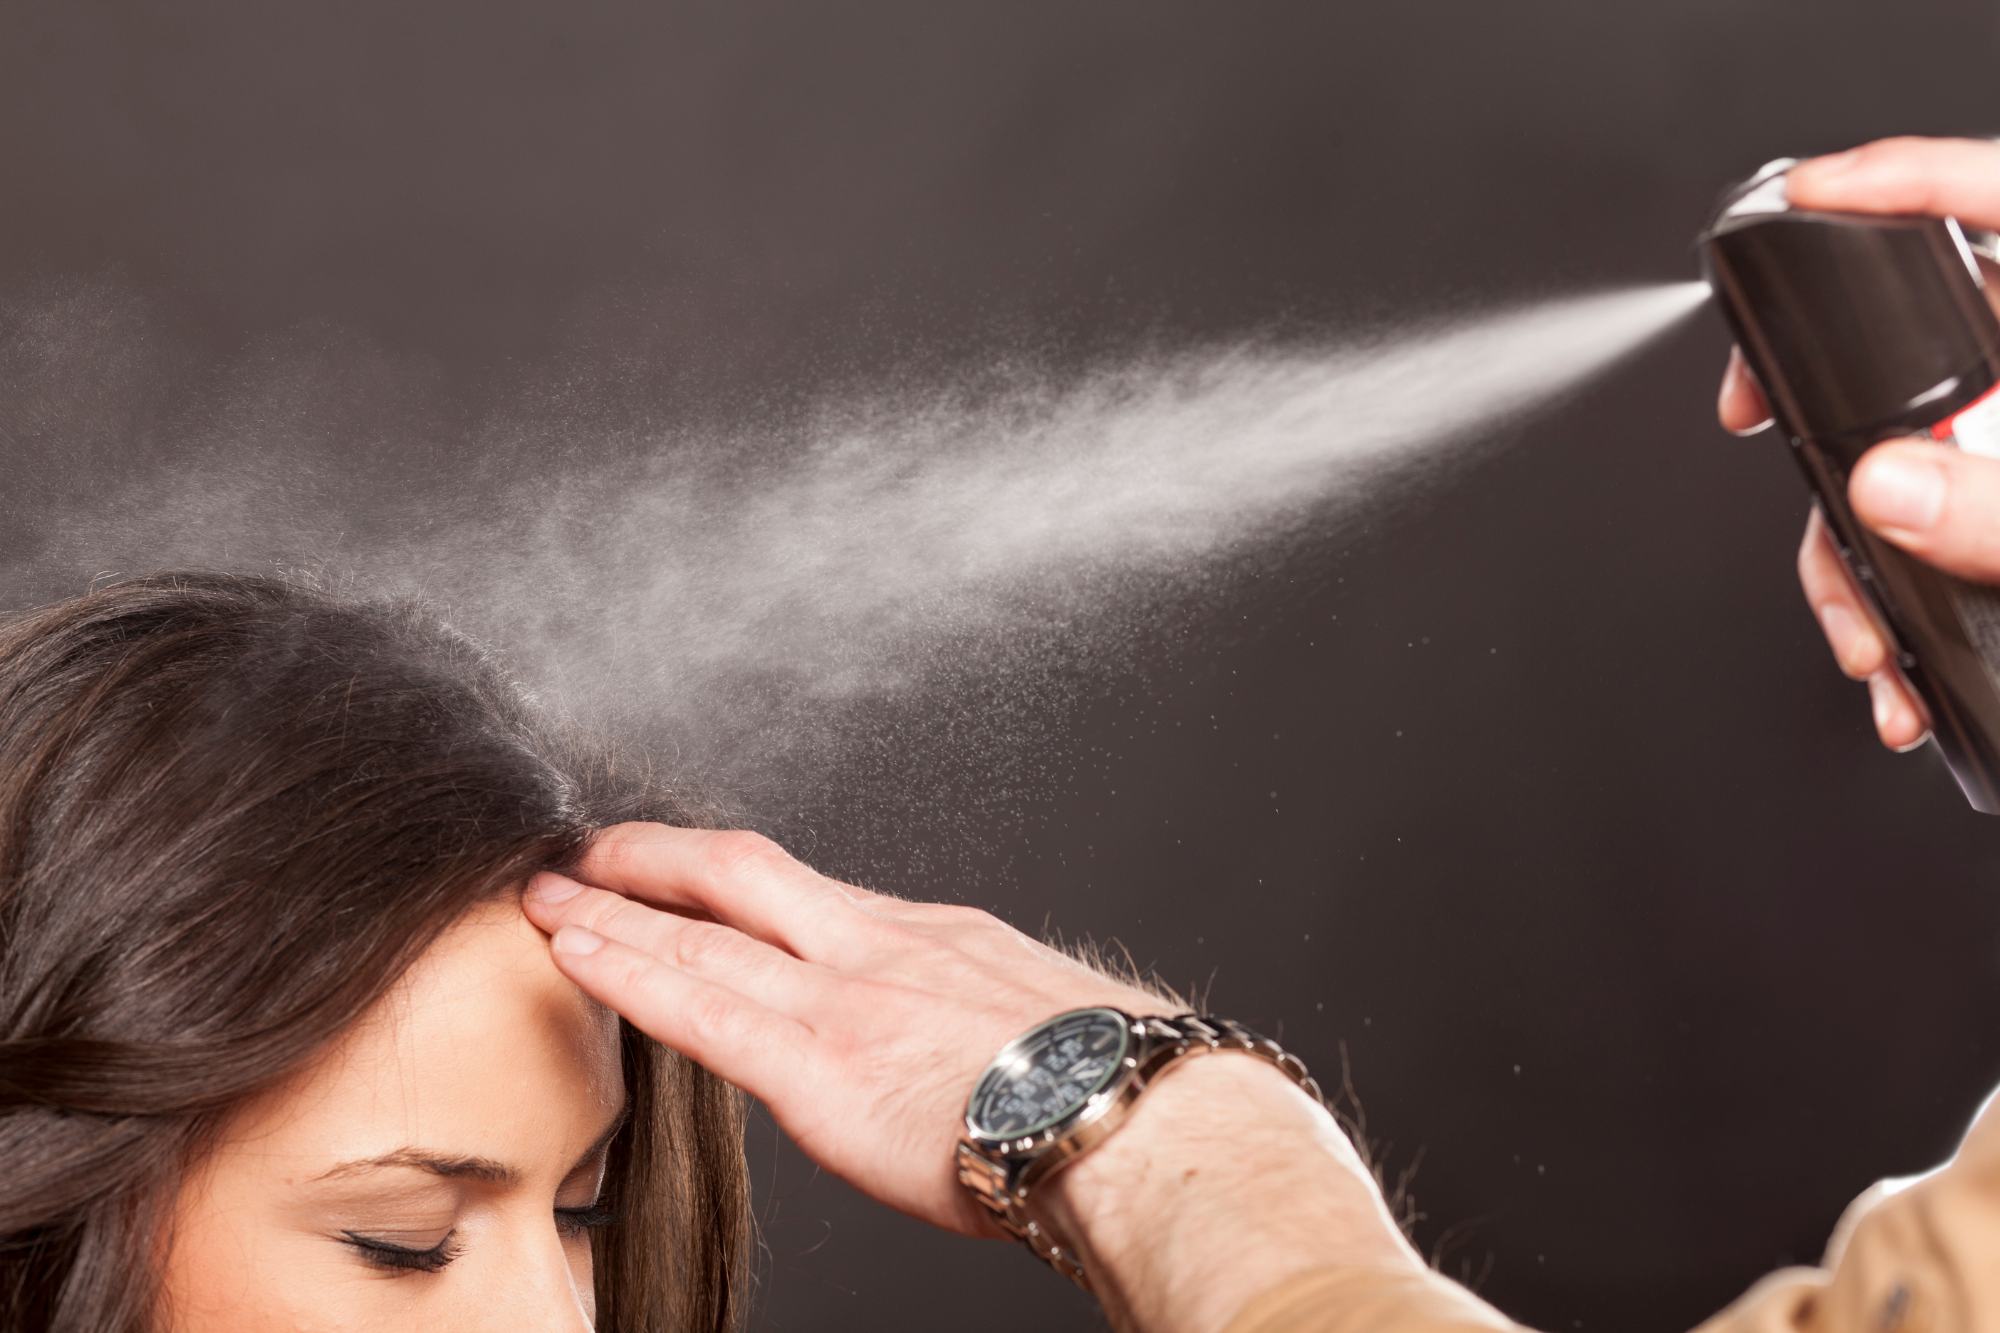 Is Hairspray Bad For Your Hair?